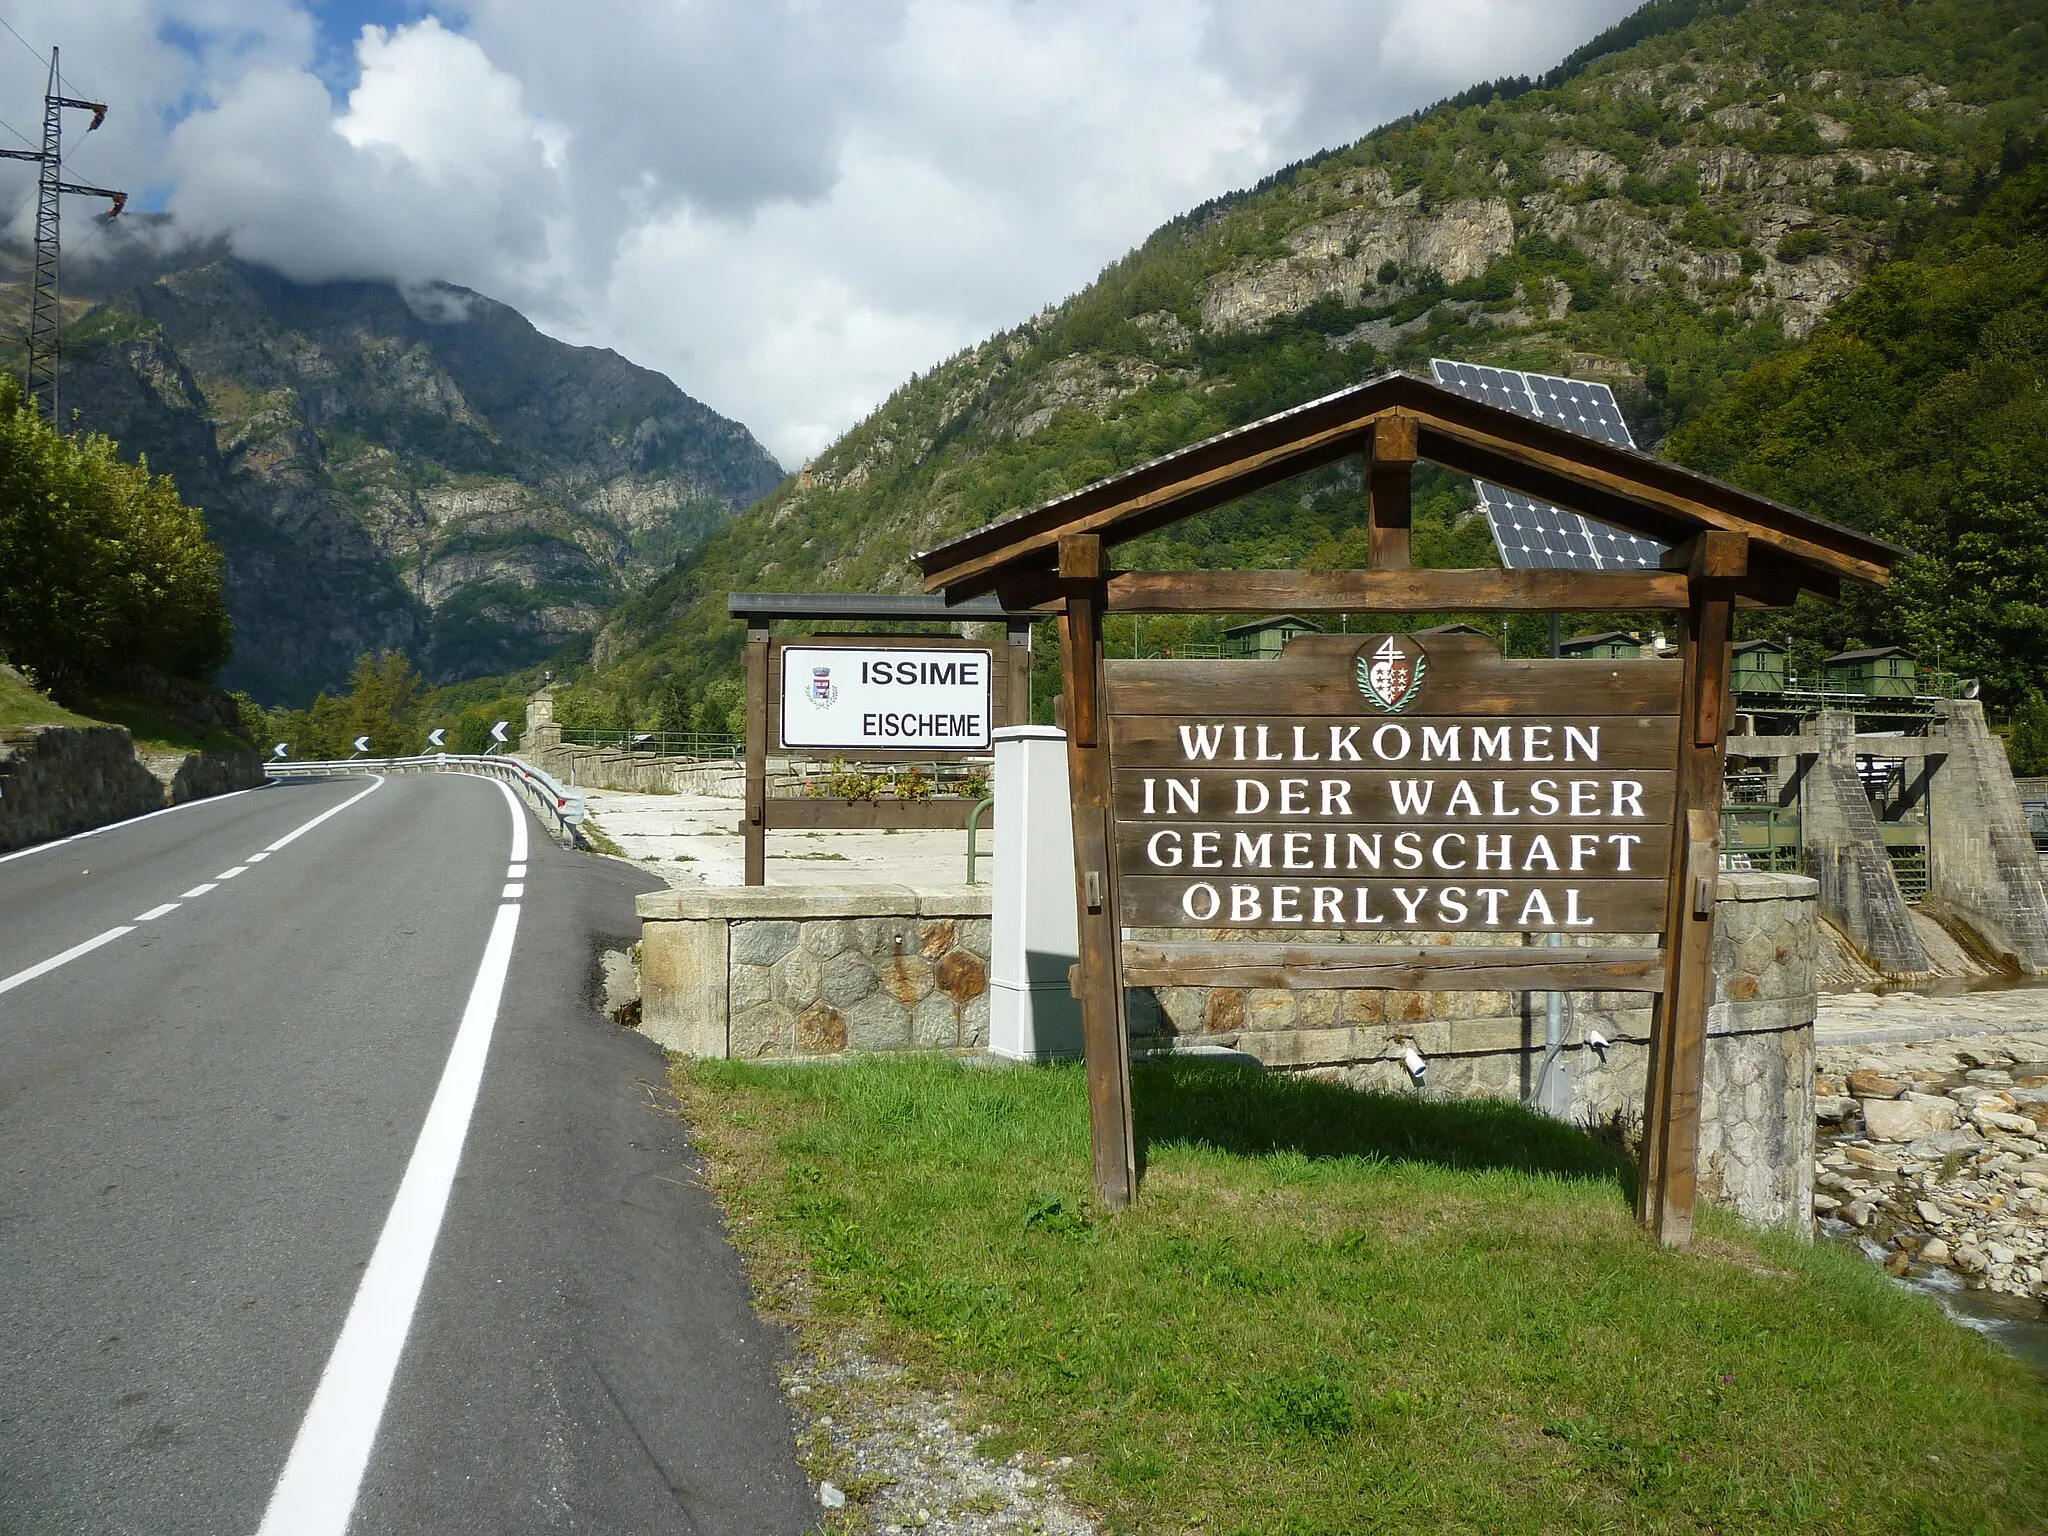 Photo showing: Entrance of Walsergemeinschaft Oberlystal in Aosta Valley (Italy)